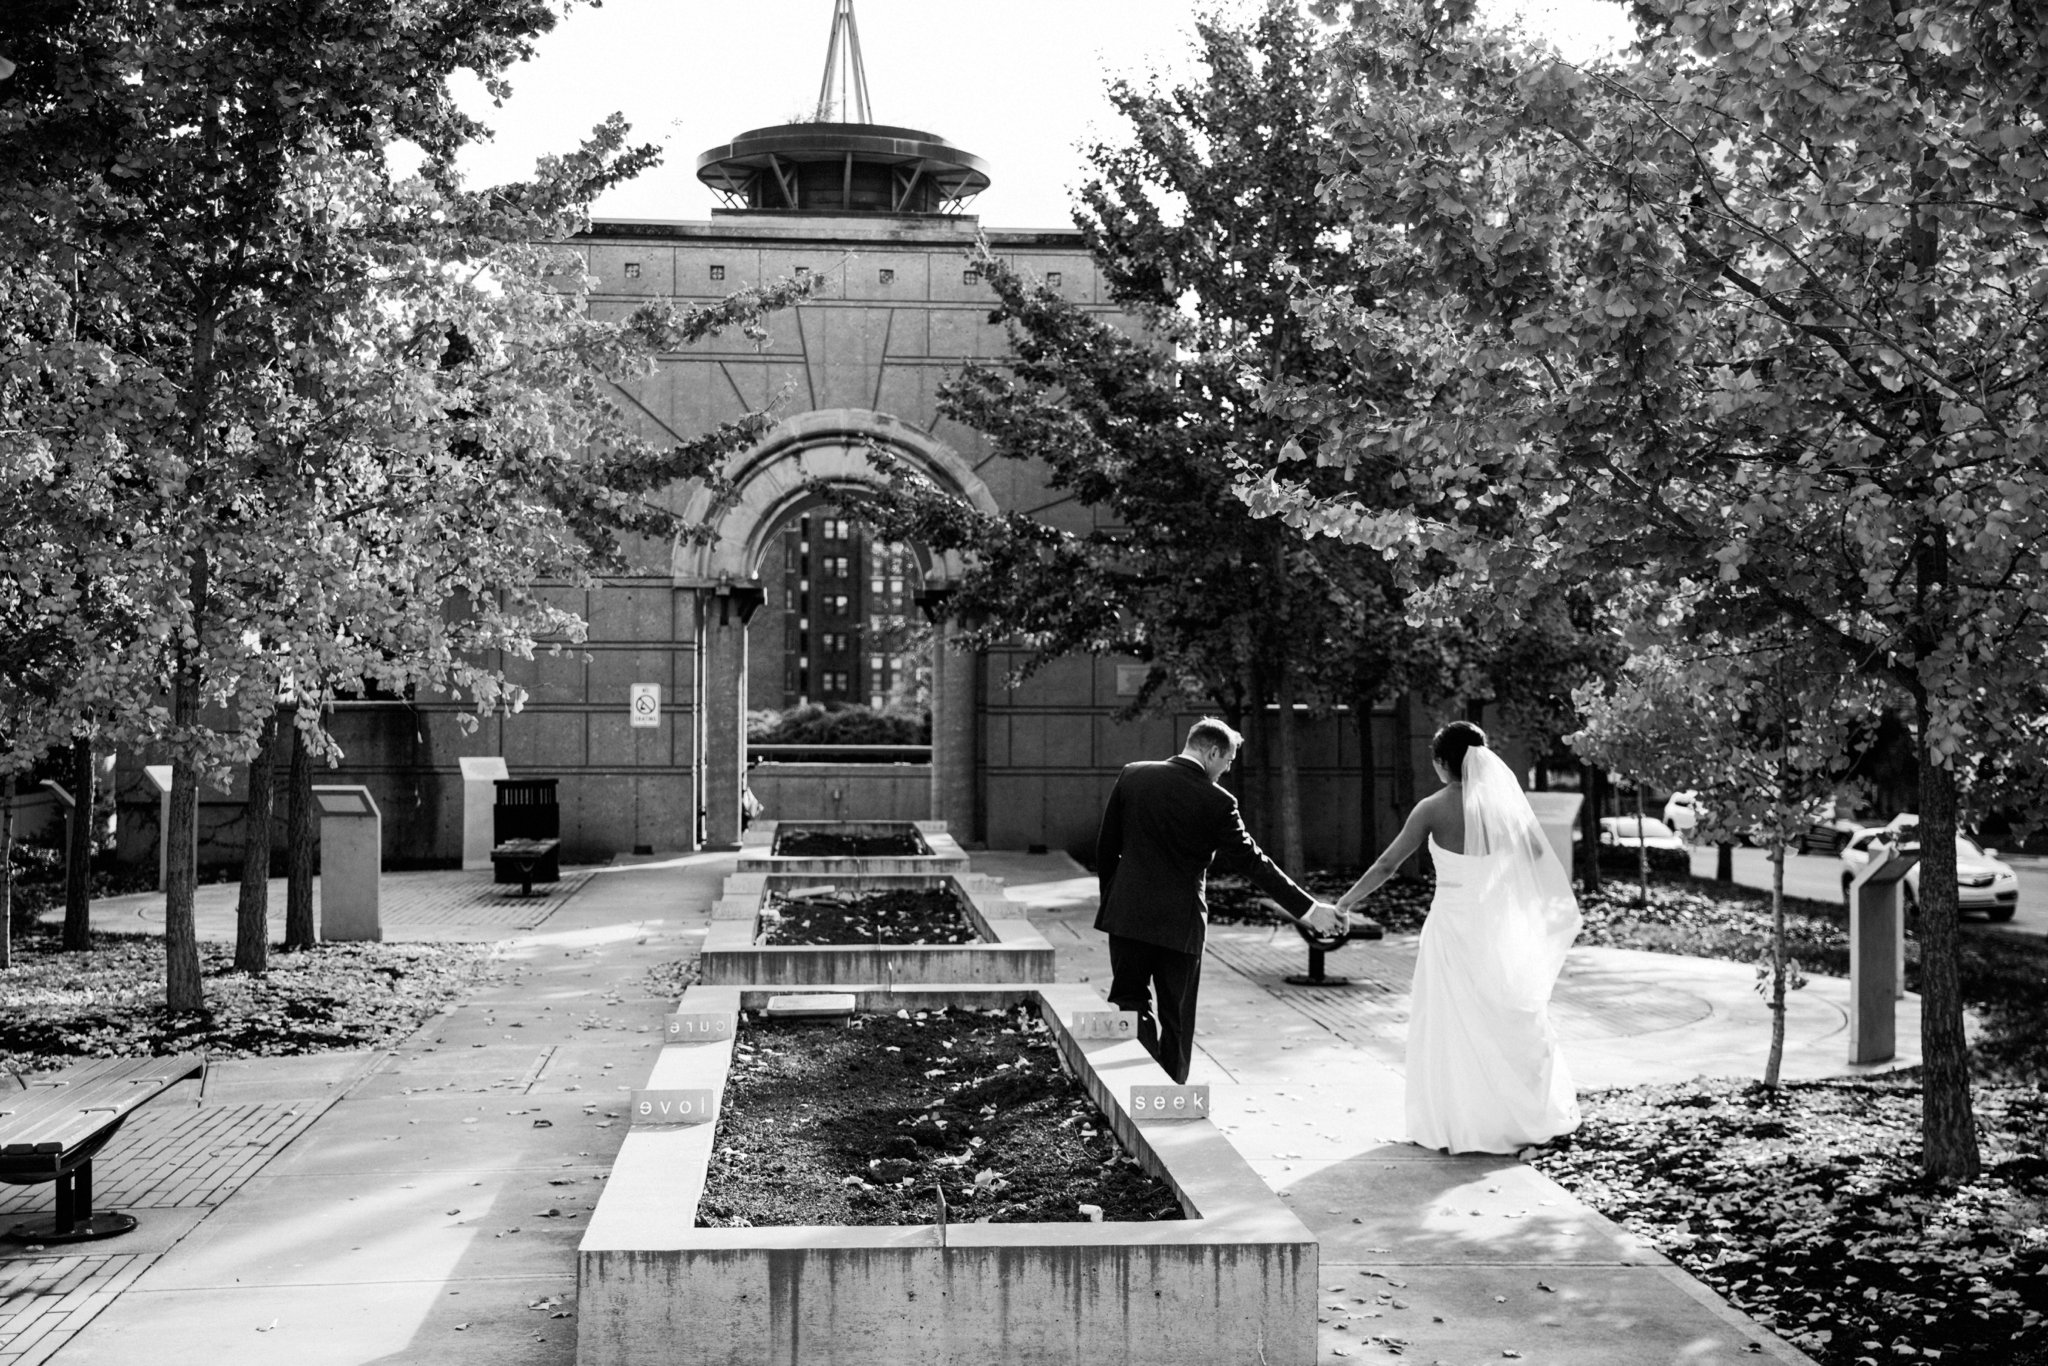 black and white | wedding | wedding photos | wedding photography | images by feliciathephotographer.com | Country Club Plaza | Kansas City | Unity Temple | Cancer Survivor Park | bride and groom portraits | candid | walking through park | hand holding